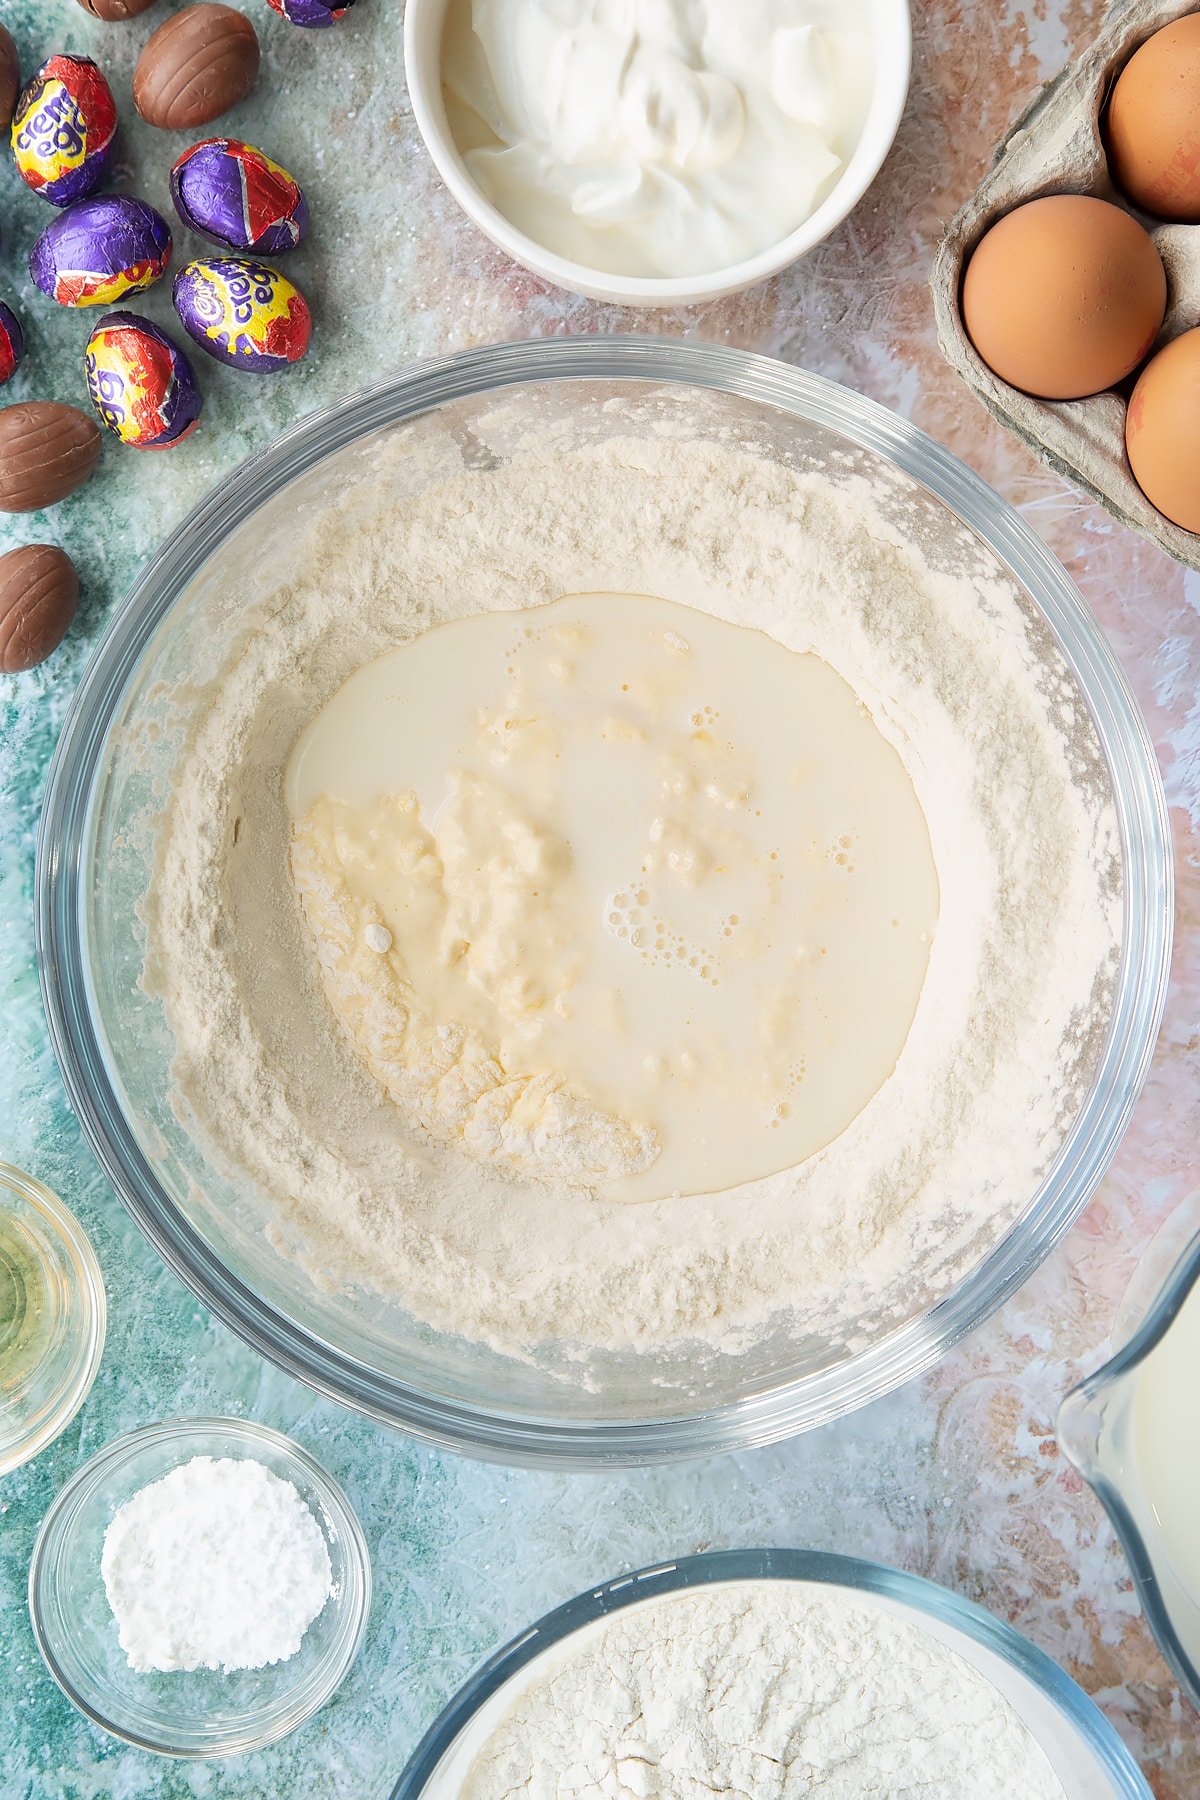 Self-raising flour and baking powder in a bowl with a well in the centre filled with crème fraîche, eggs, vanilla and milk, with some of the flour incorporated. Ingredients to make Creme Egg pancakes surround the bowl.